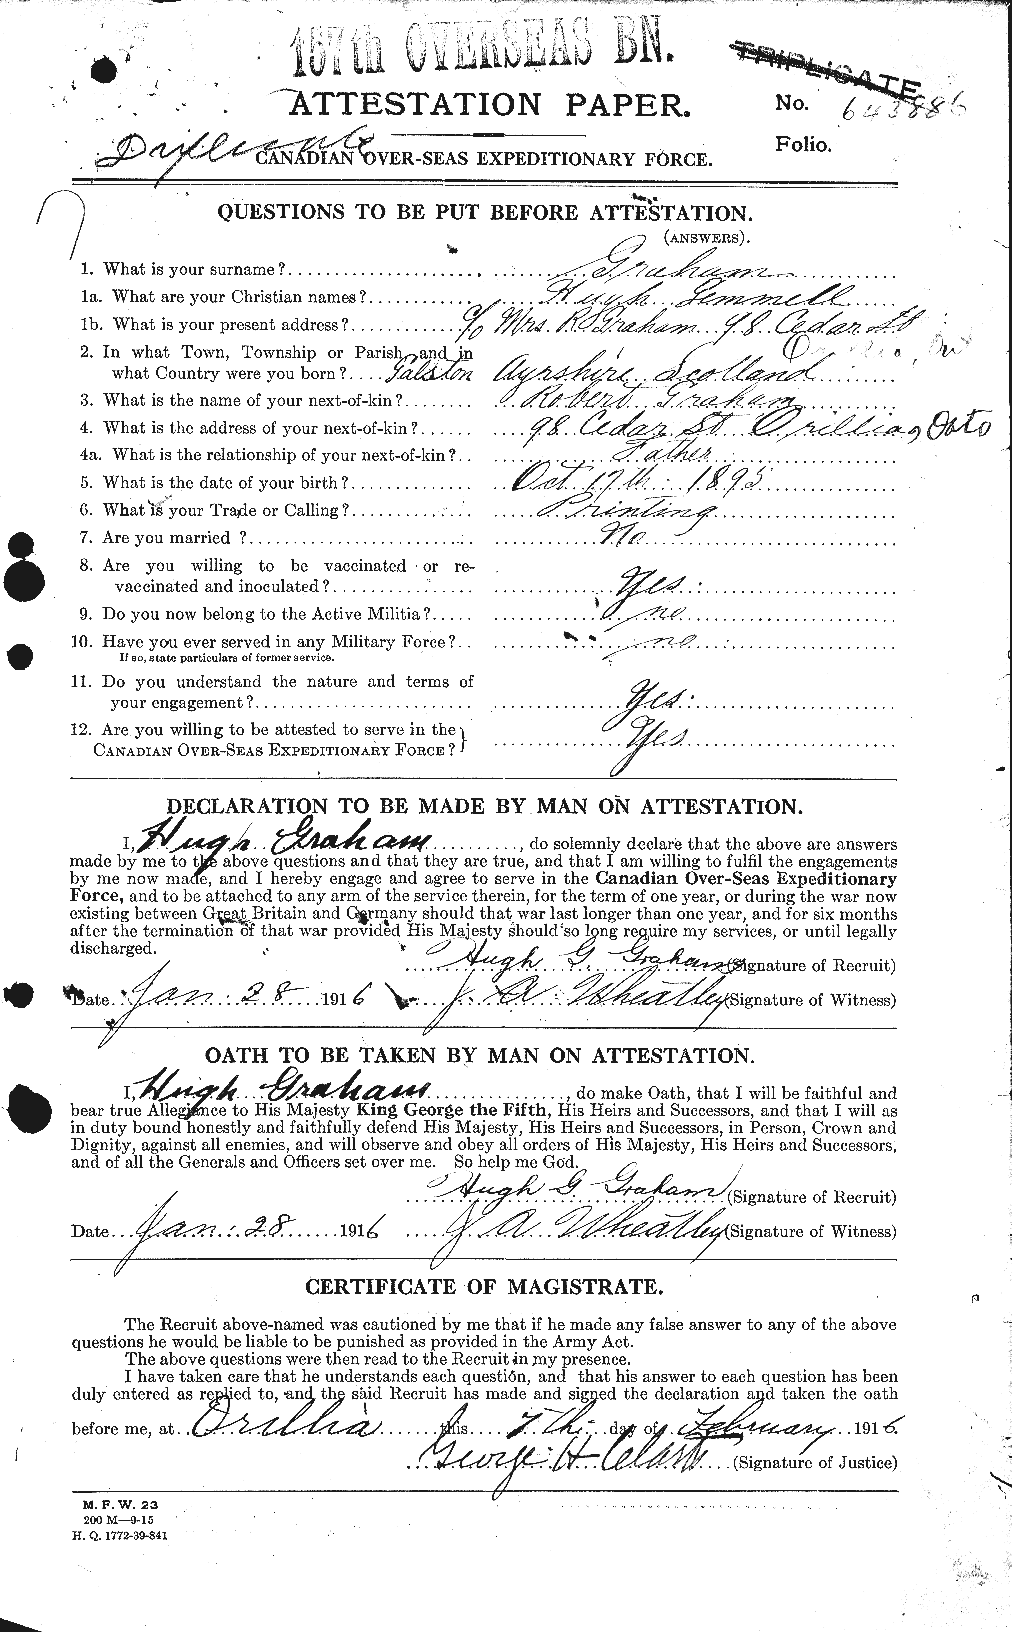 Personnel Records of the First World War - CEF 357761a